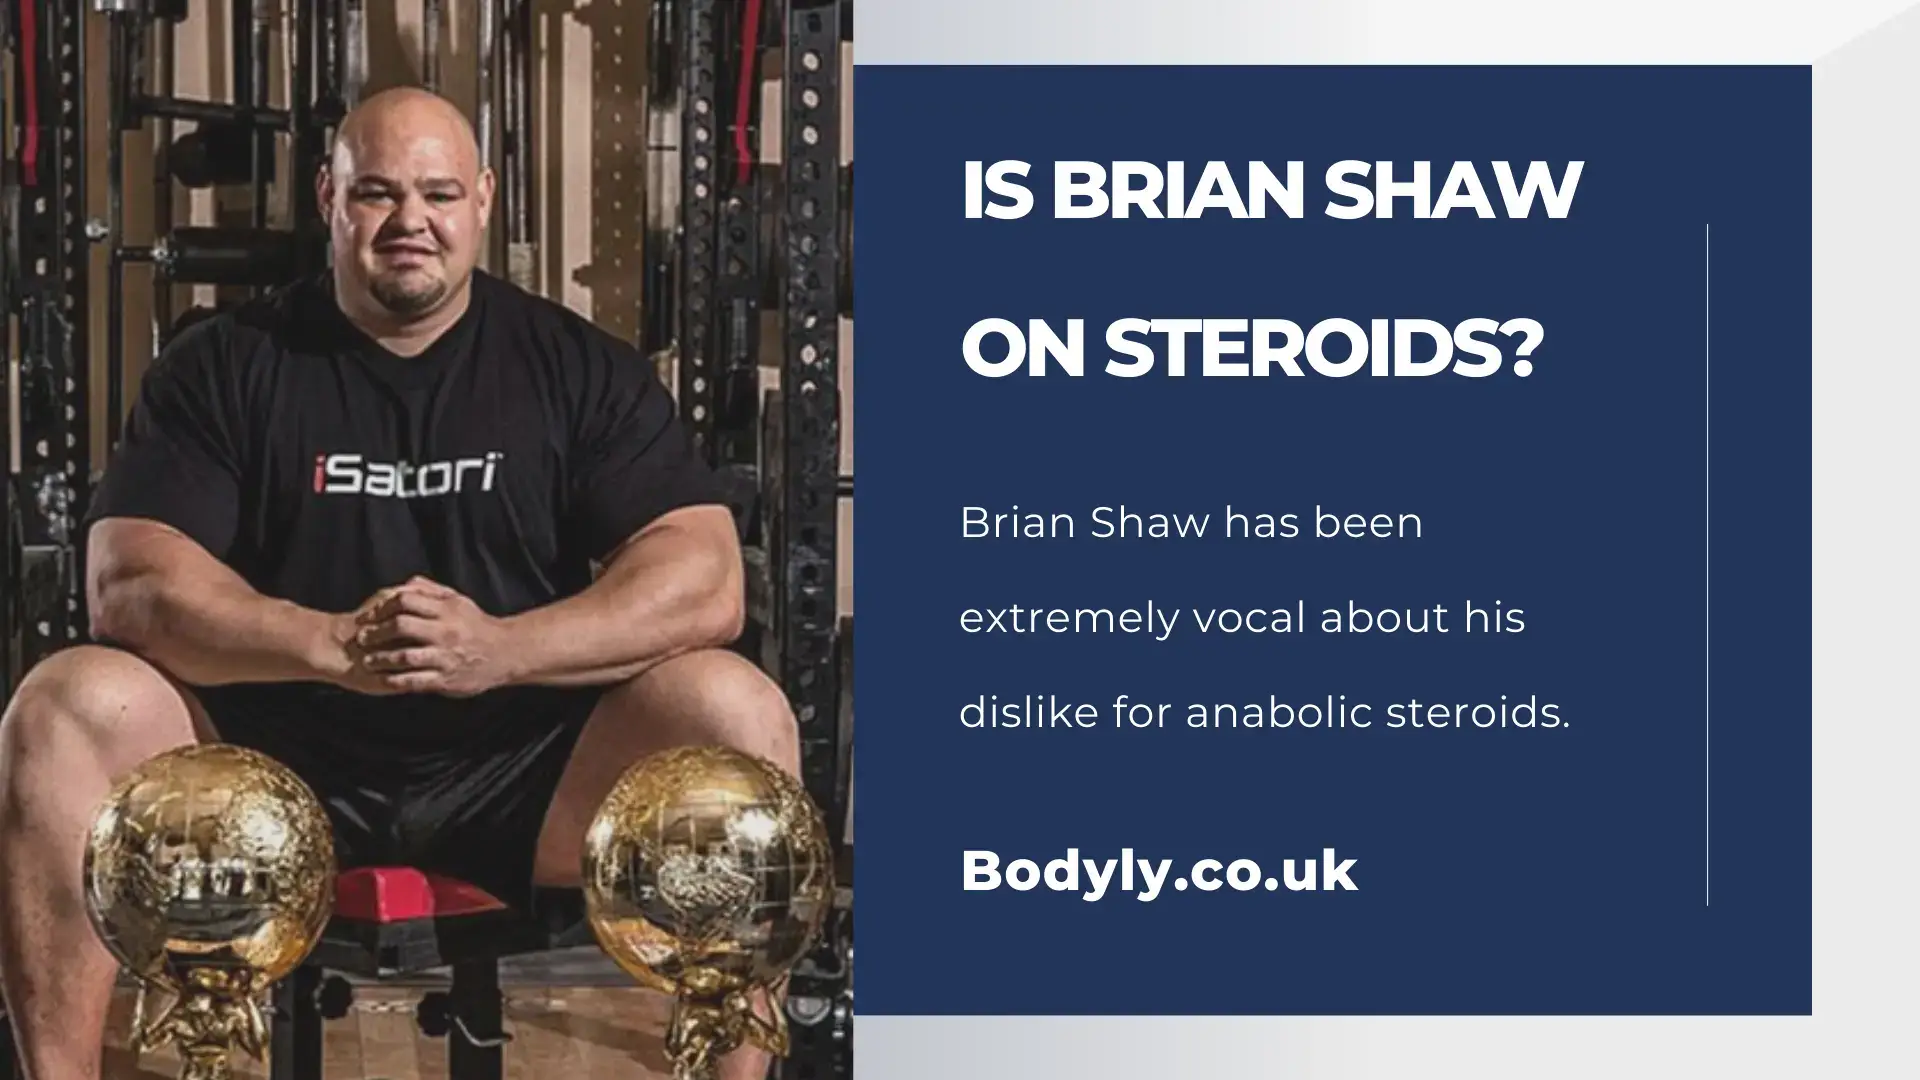 Is Brian Shaw on steroids